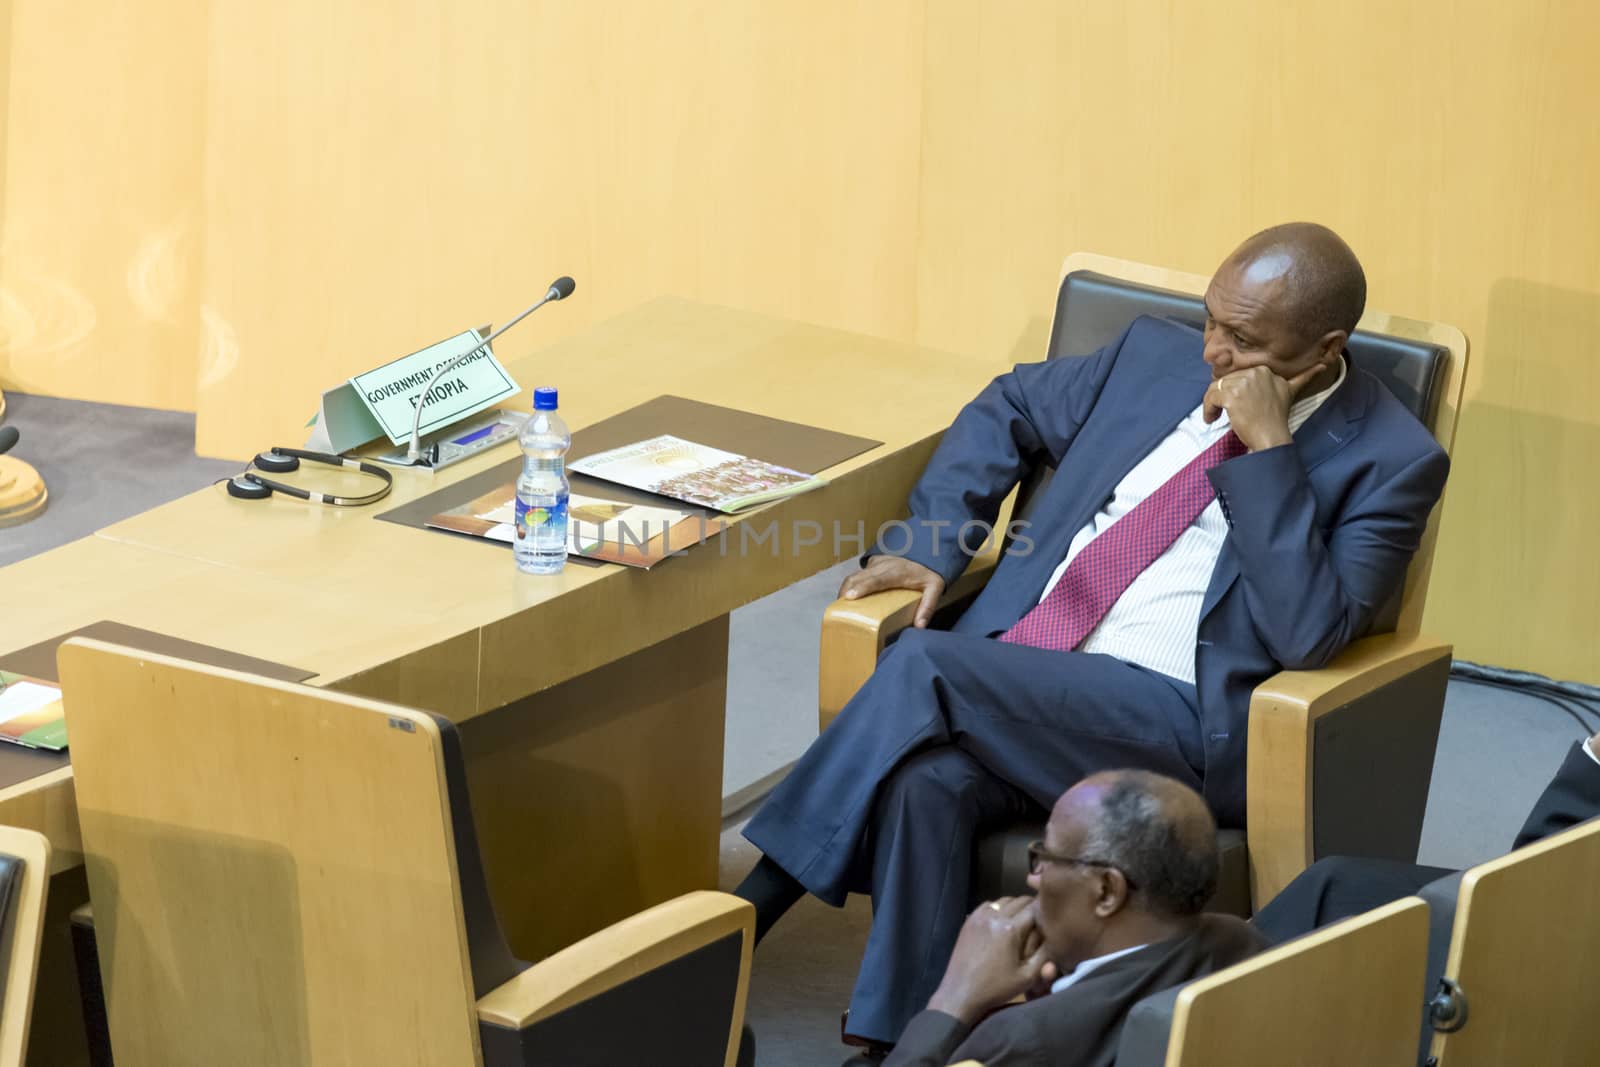 Addis Ababa - July 28: Ato Bereket Semon awaits the arrival of President Obama on July 28, 2015, at the AU Conference Centre in Addis Ababa, Ethiopia.